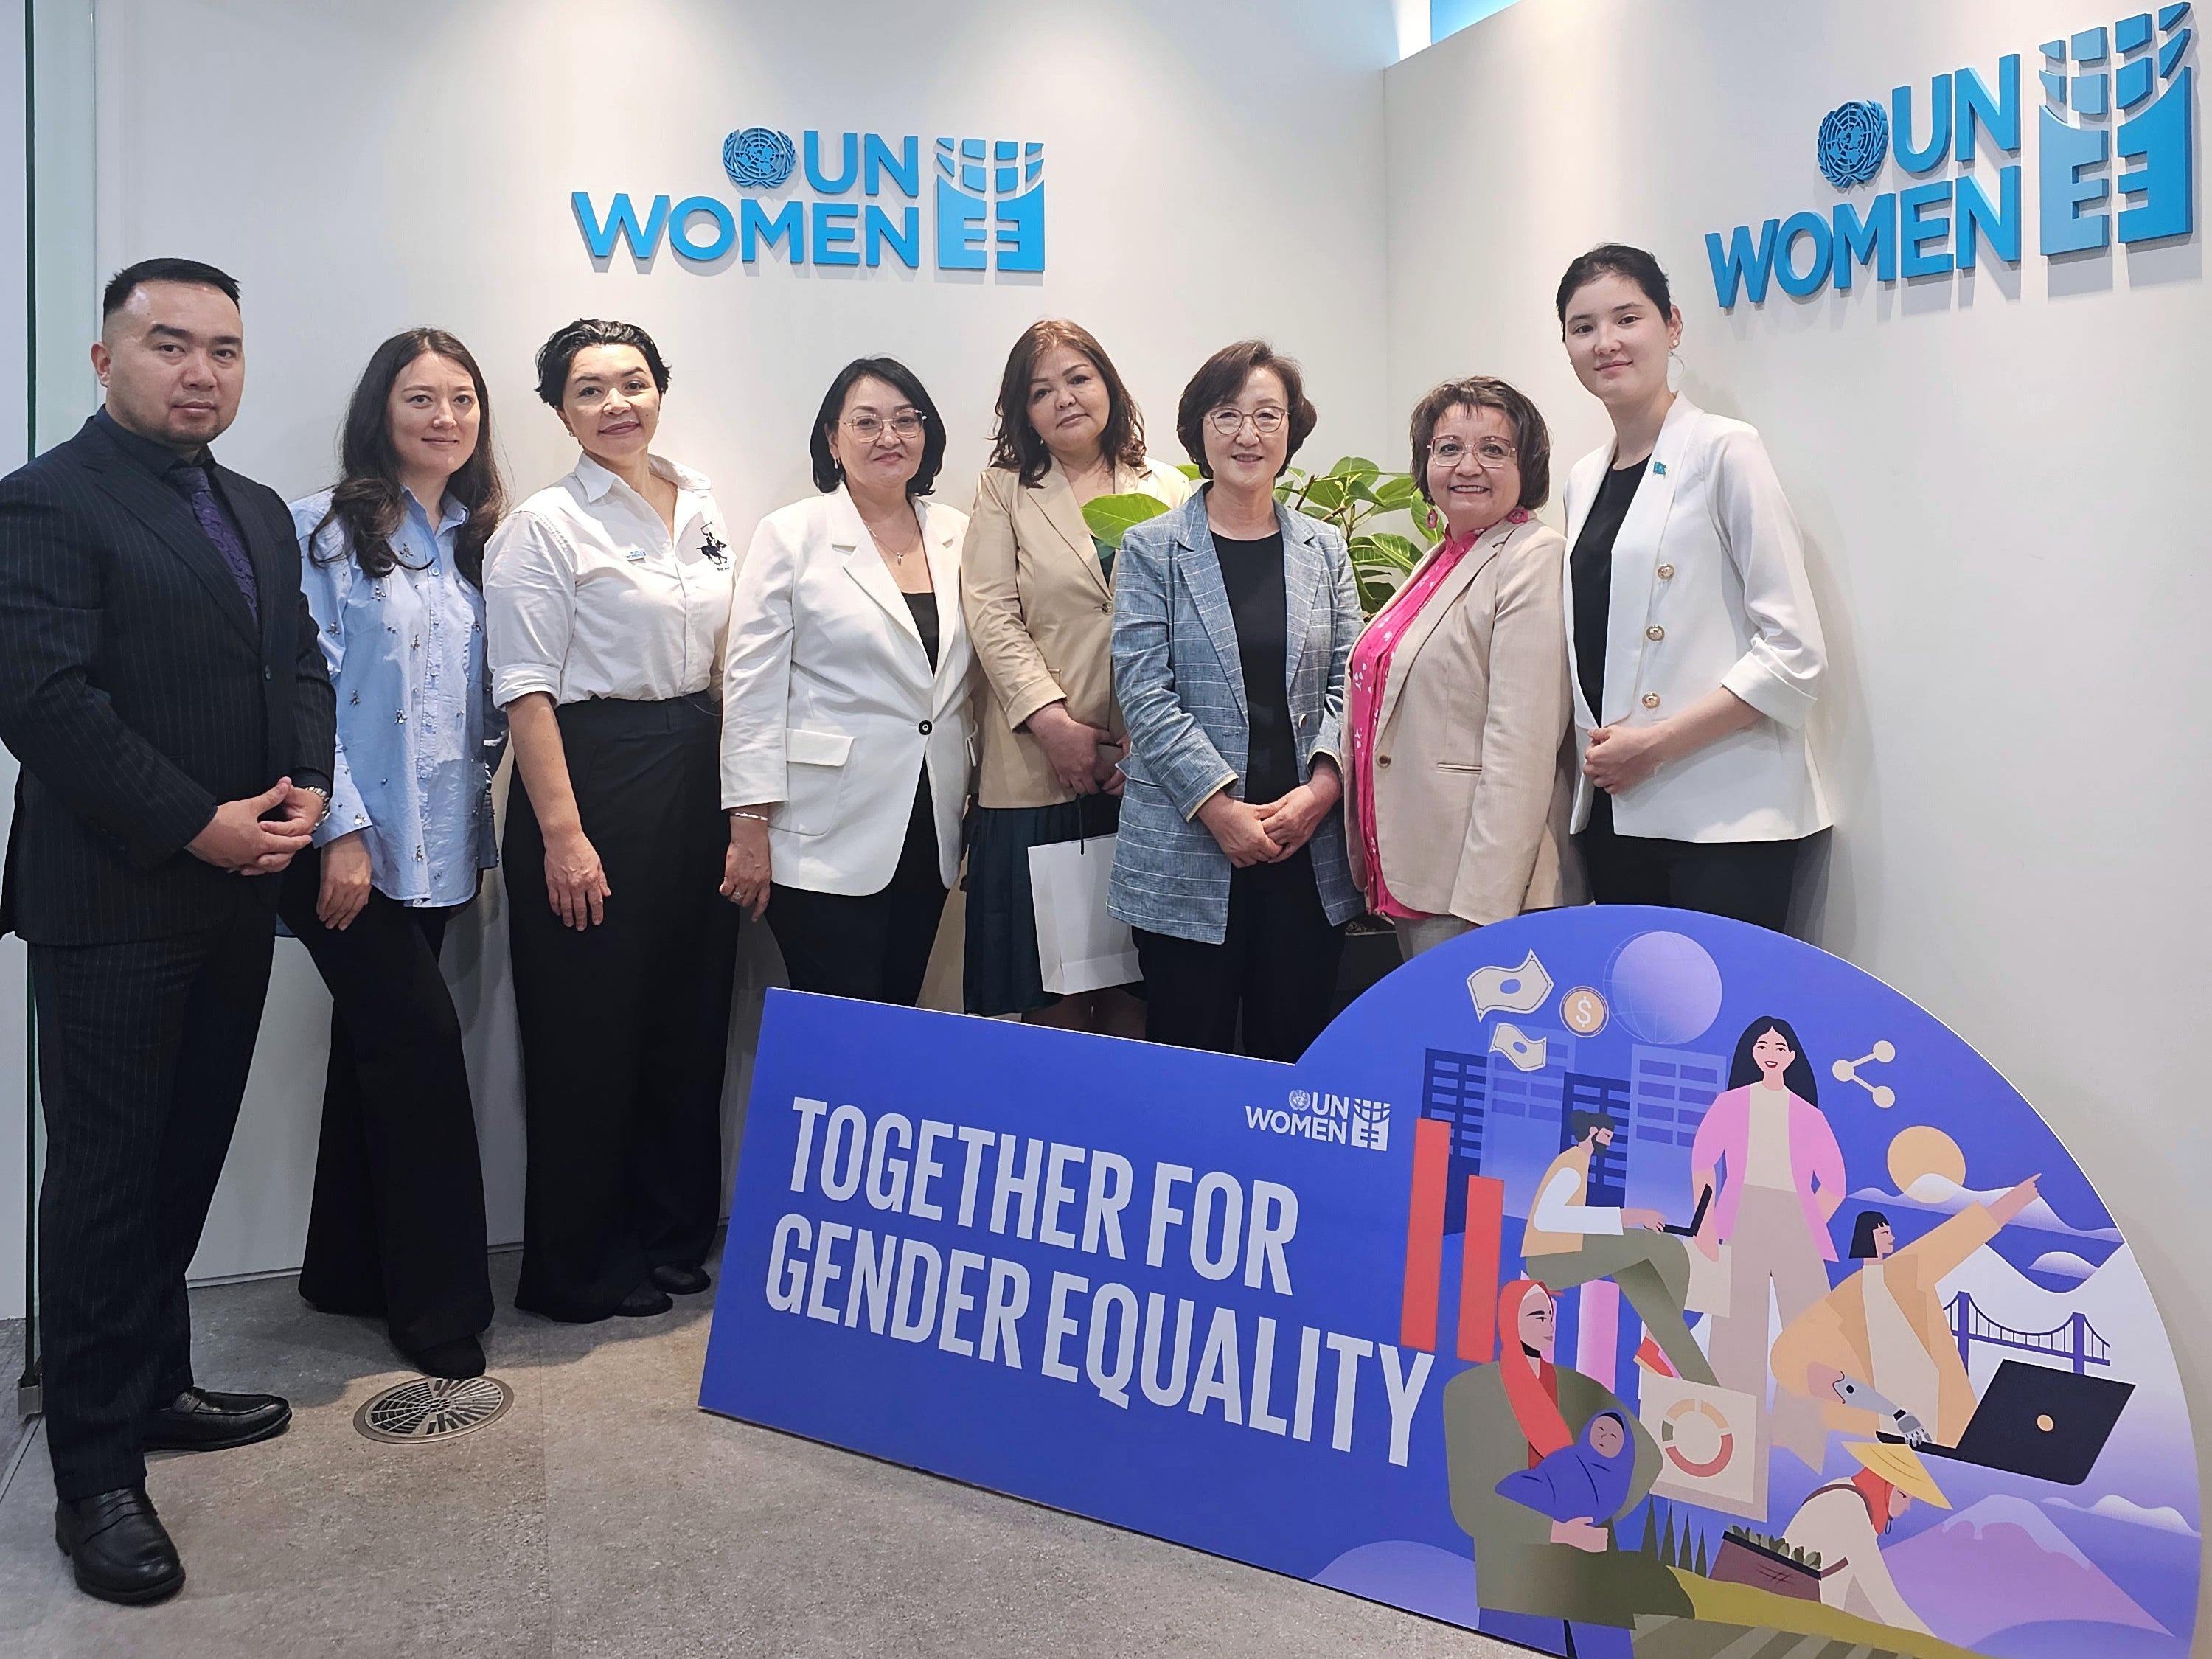 Official visit of Kazakhstan’s national delegation occurred with the support of UN Women. Photo: UN Women